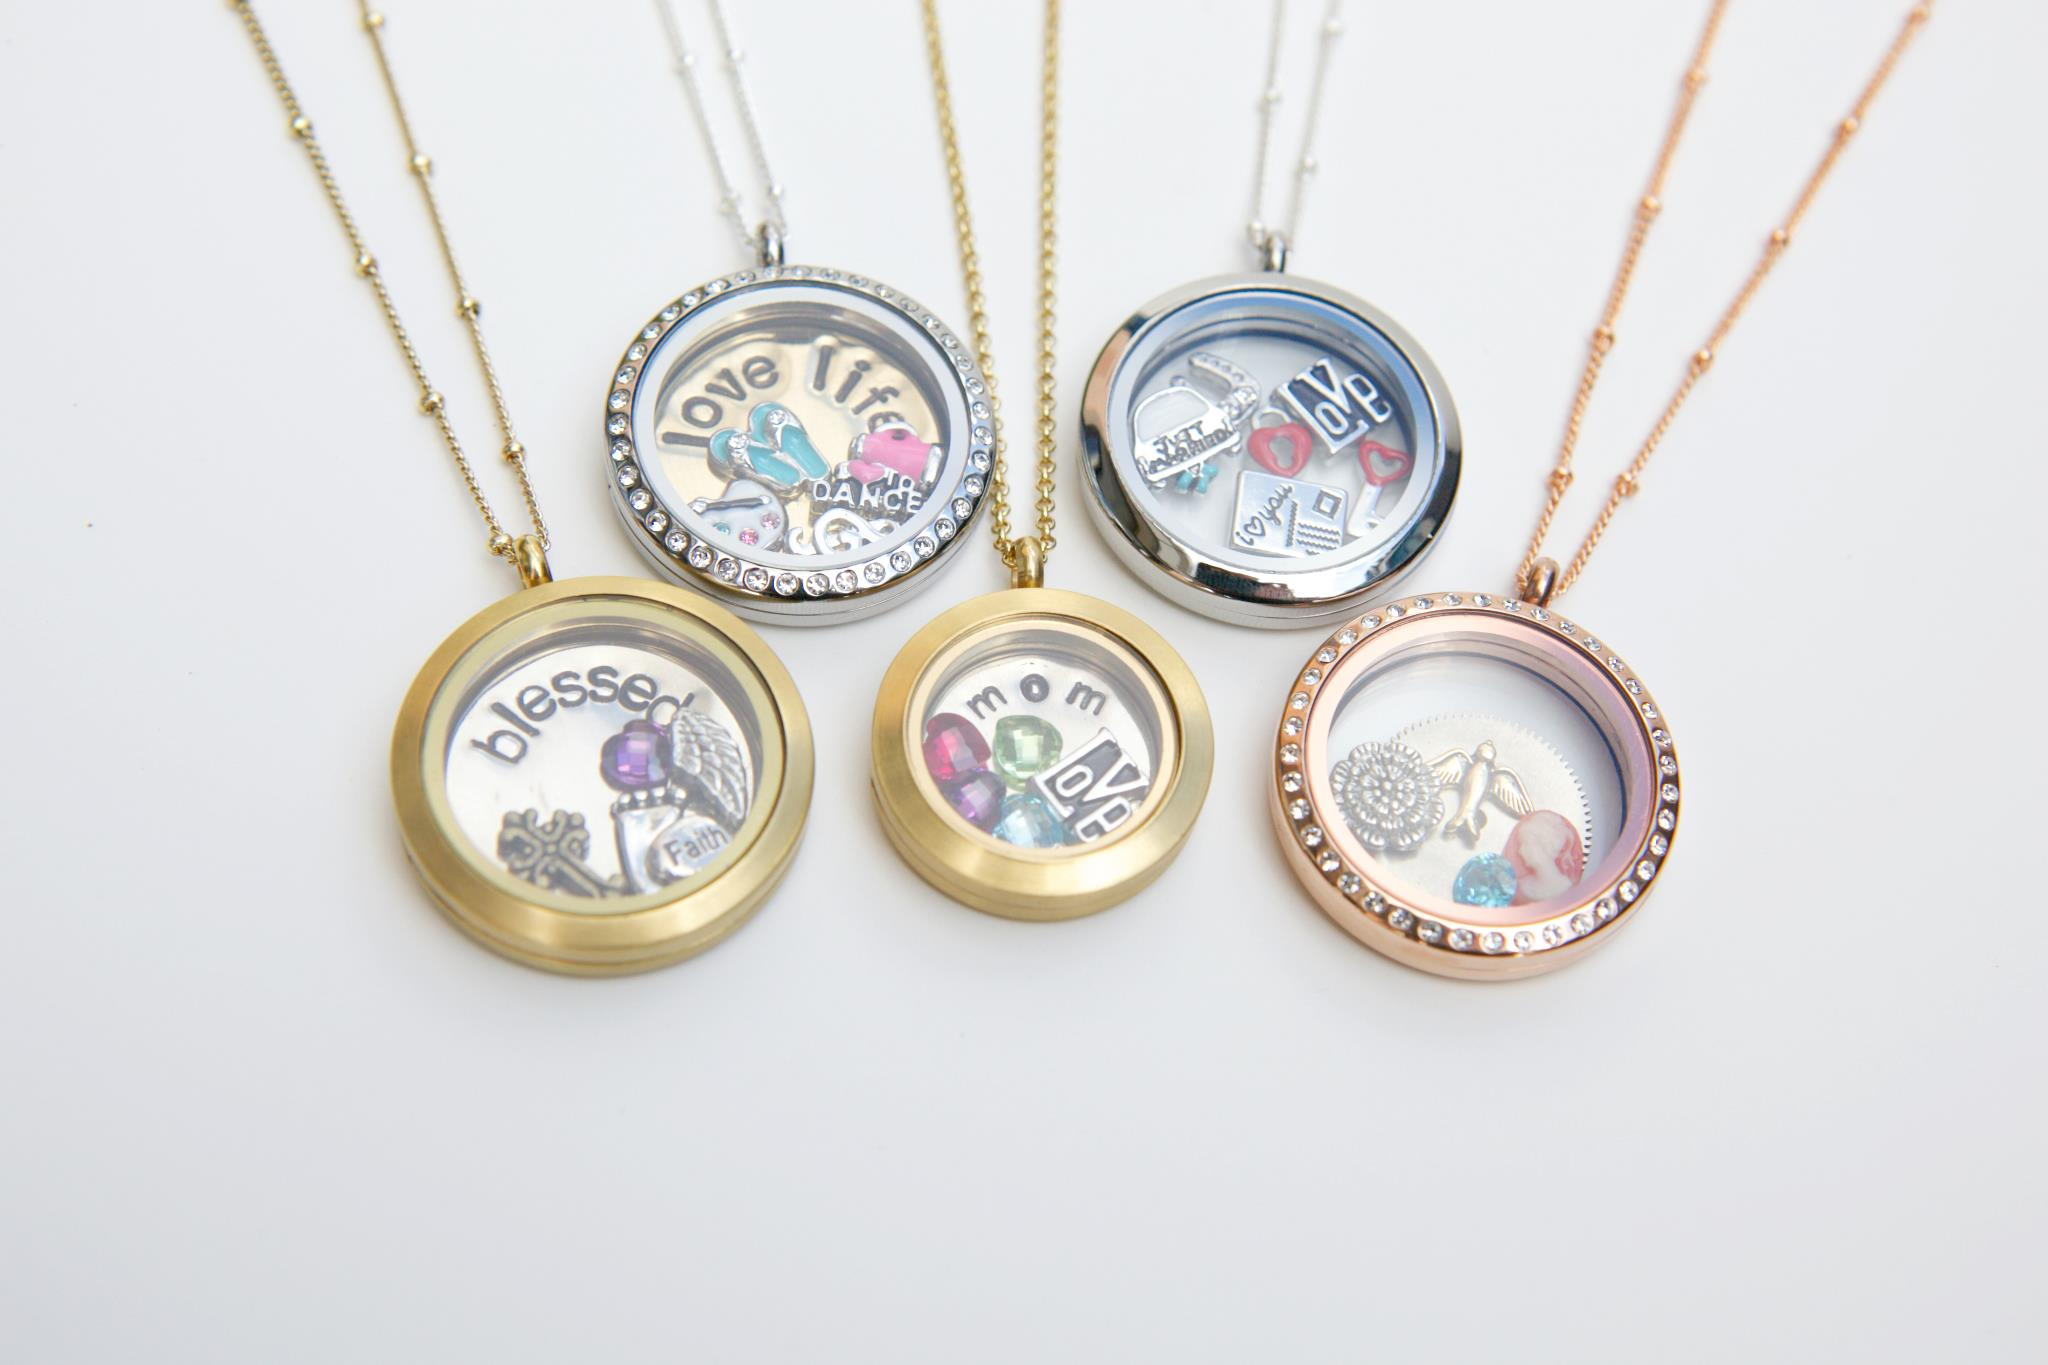 Origami Owl Locket Ideas Buy Origami Owl Jewelry Online Charms Necklace Products